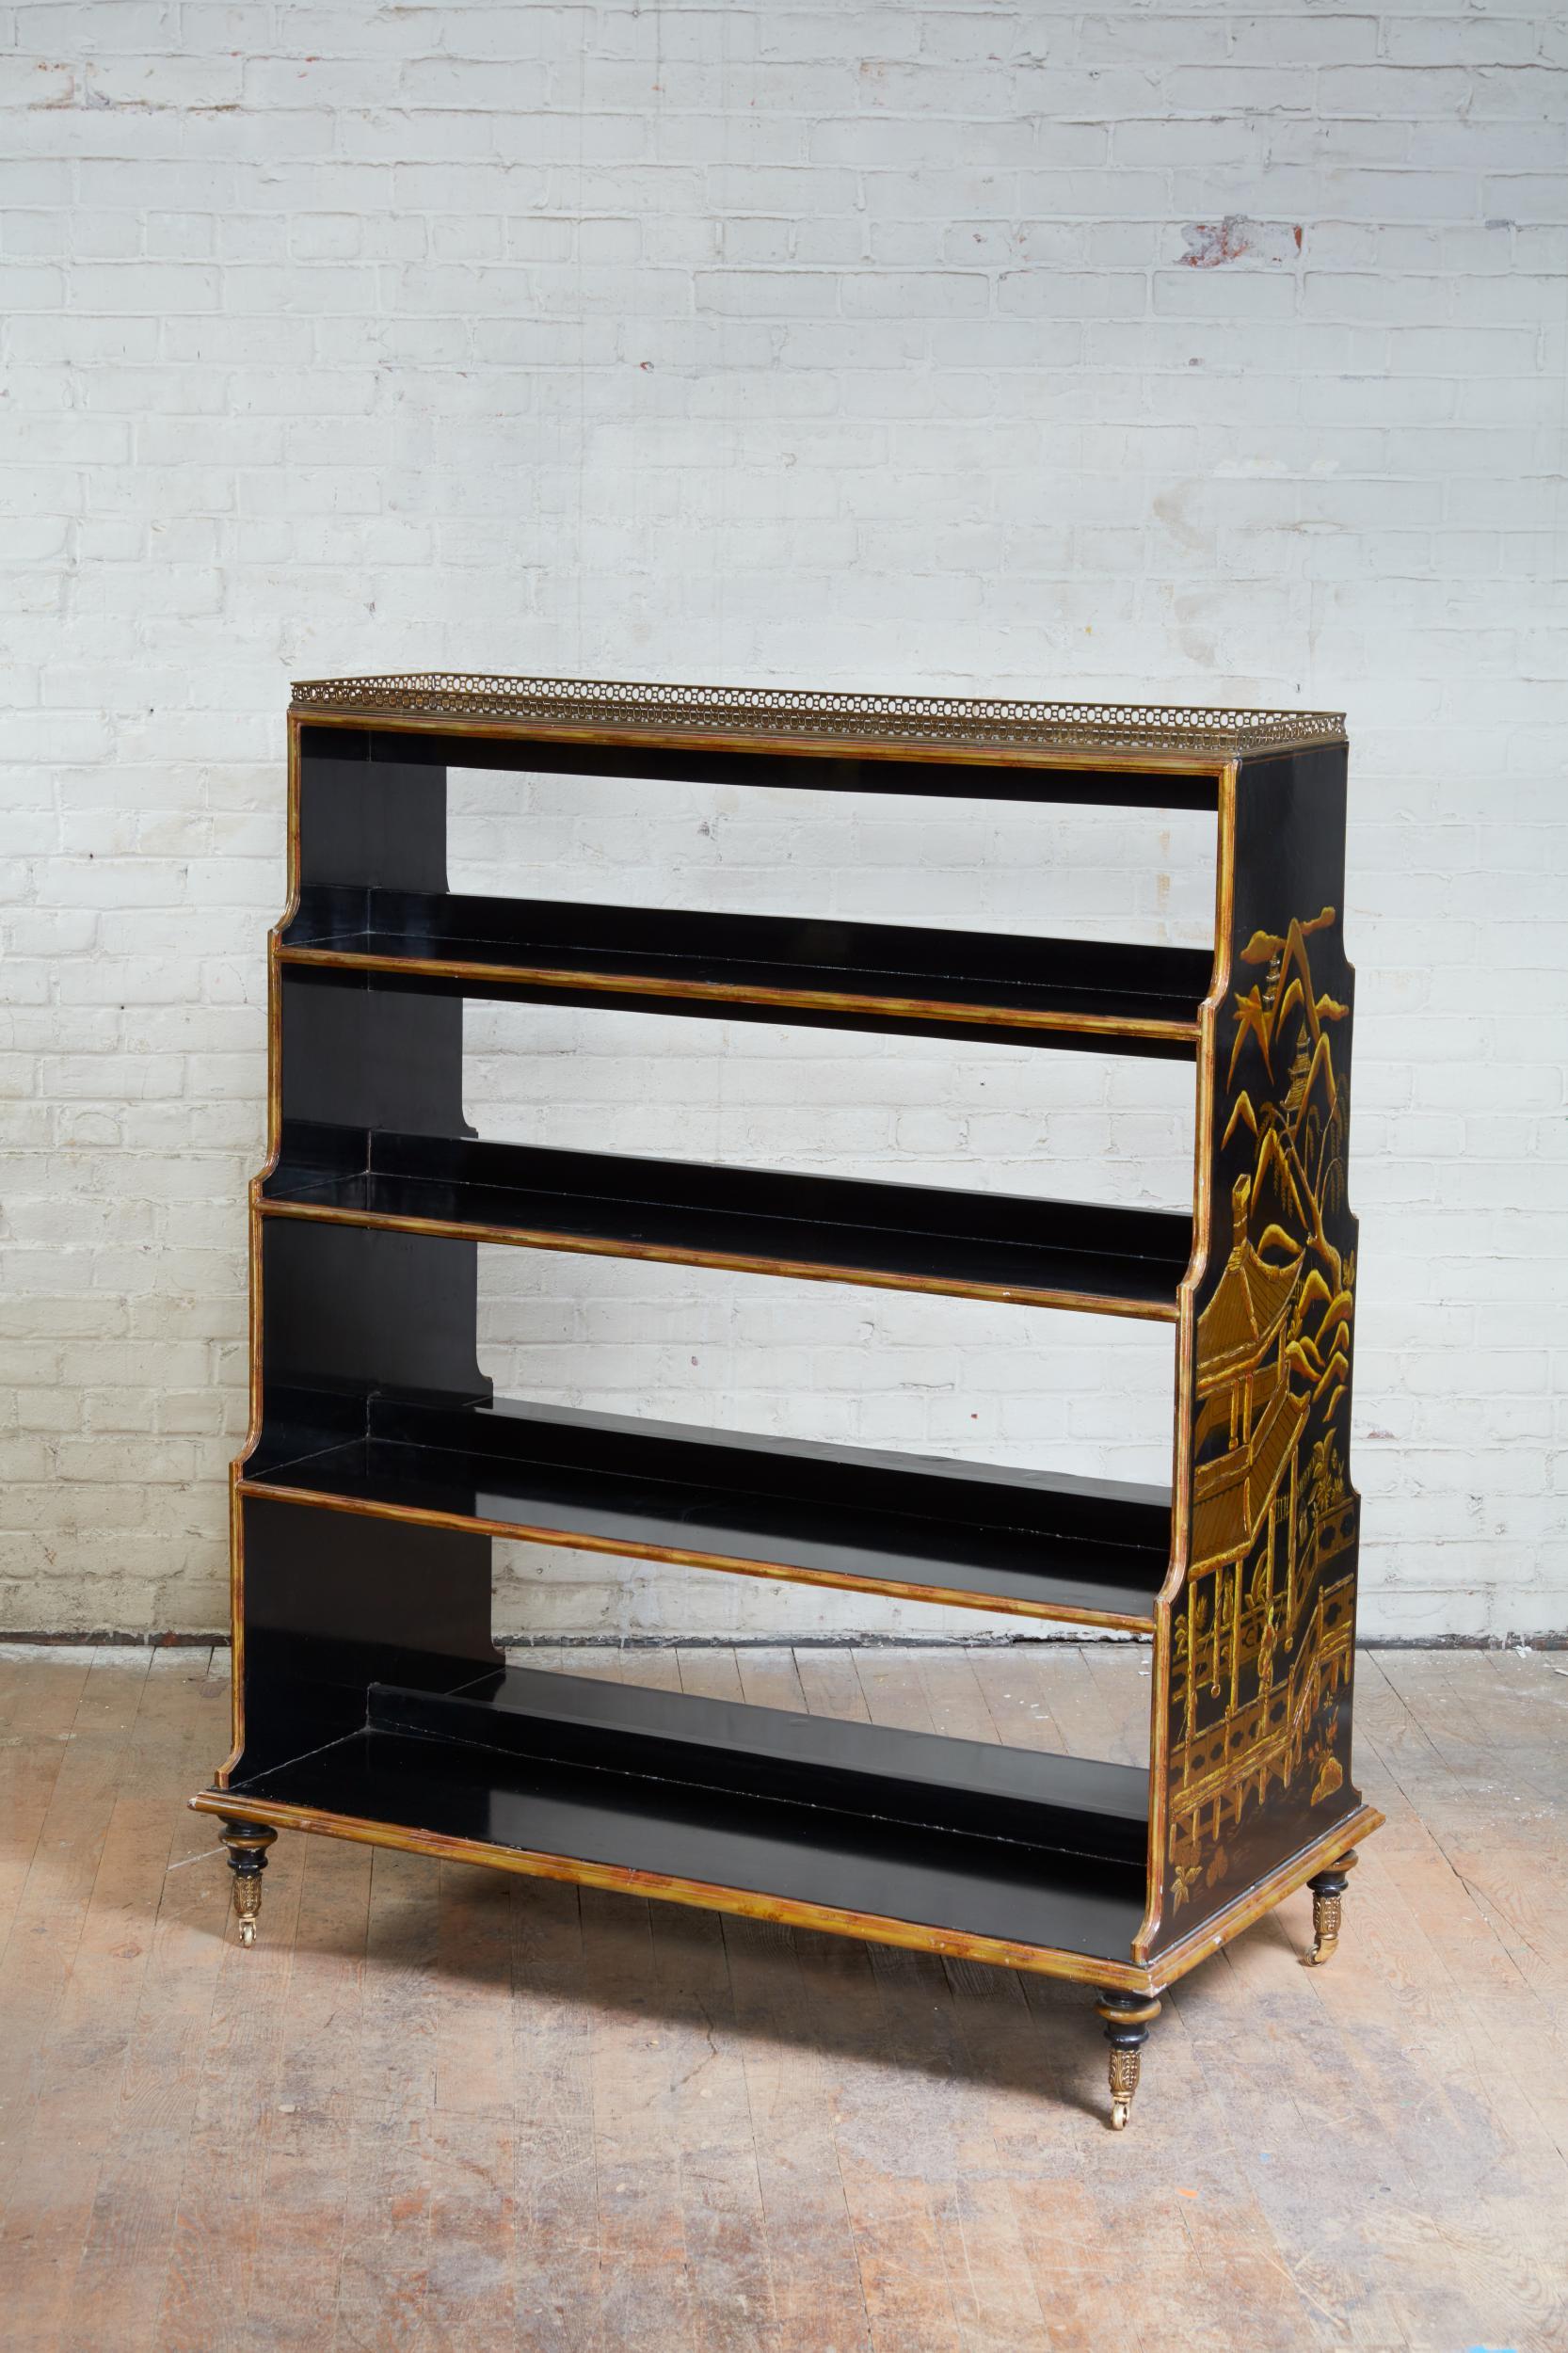 Regency style chinoiserie decorated double sided waterfall bookcase with pierced brass gallery over four graduated shelves, the two side panels lavishly decorated with fanciful scenes against a black lacquered ground, retaining original foliate cast